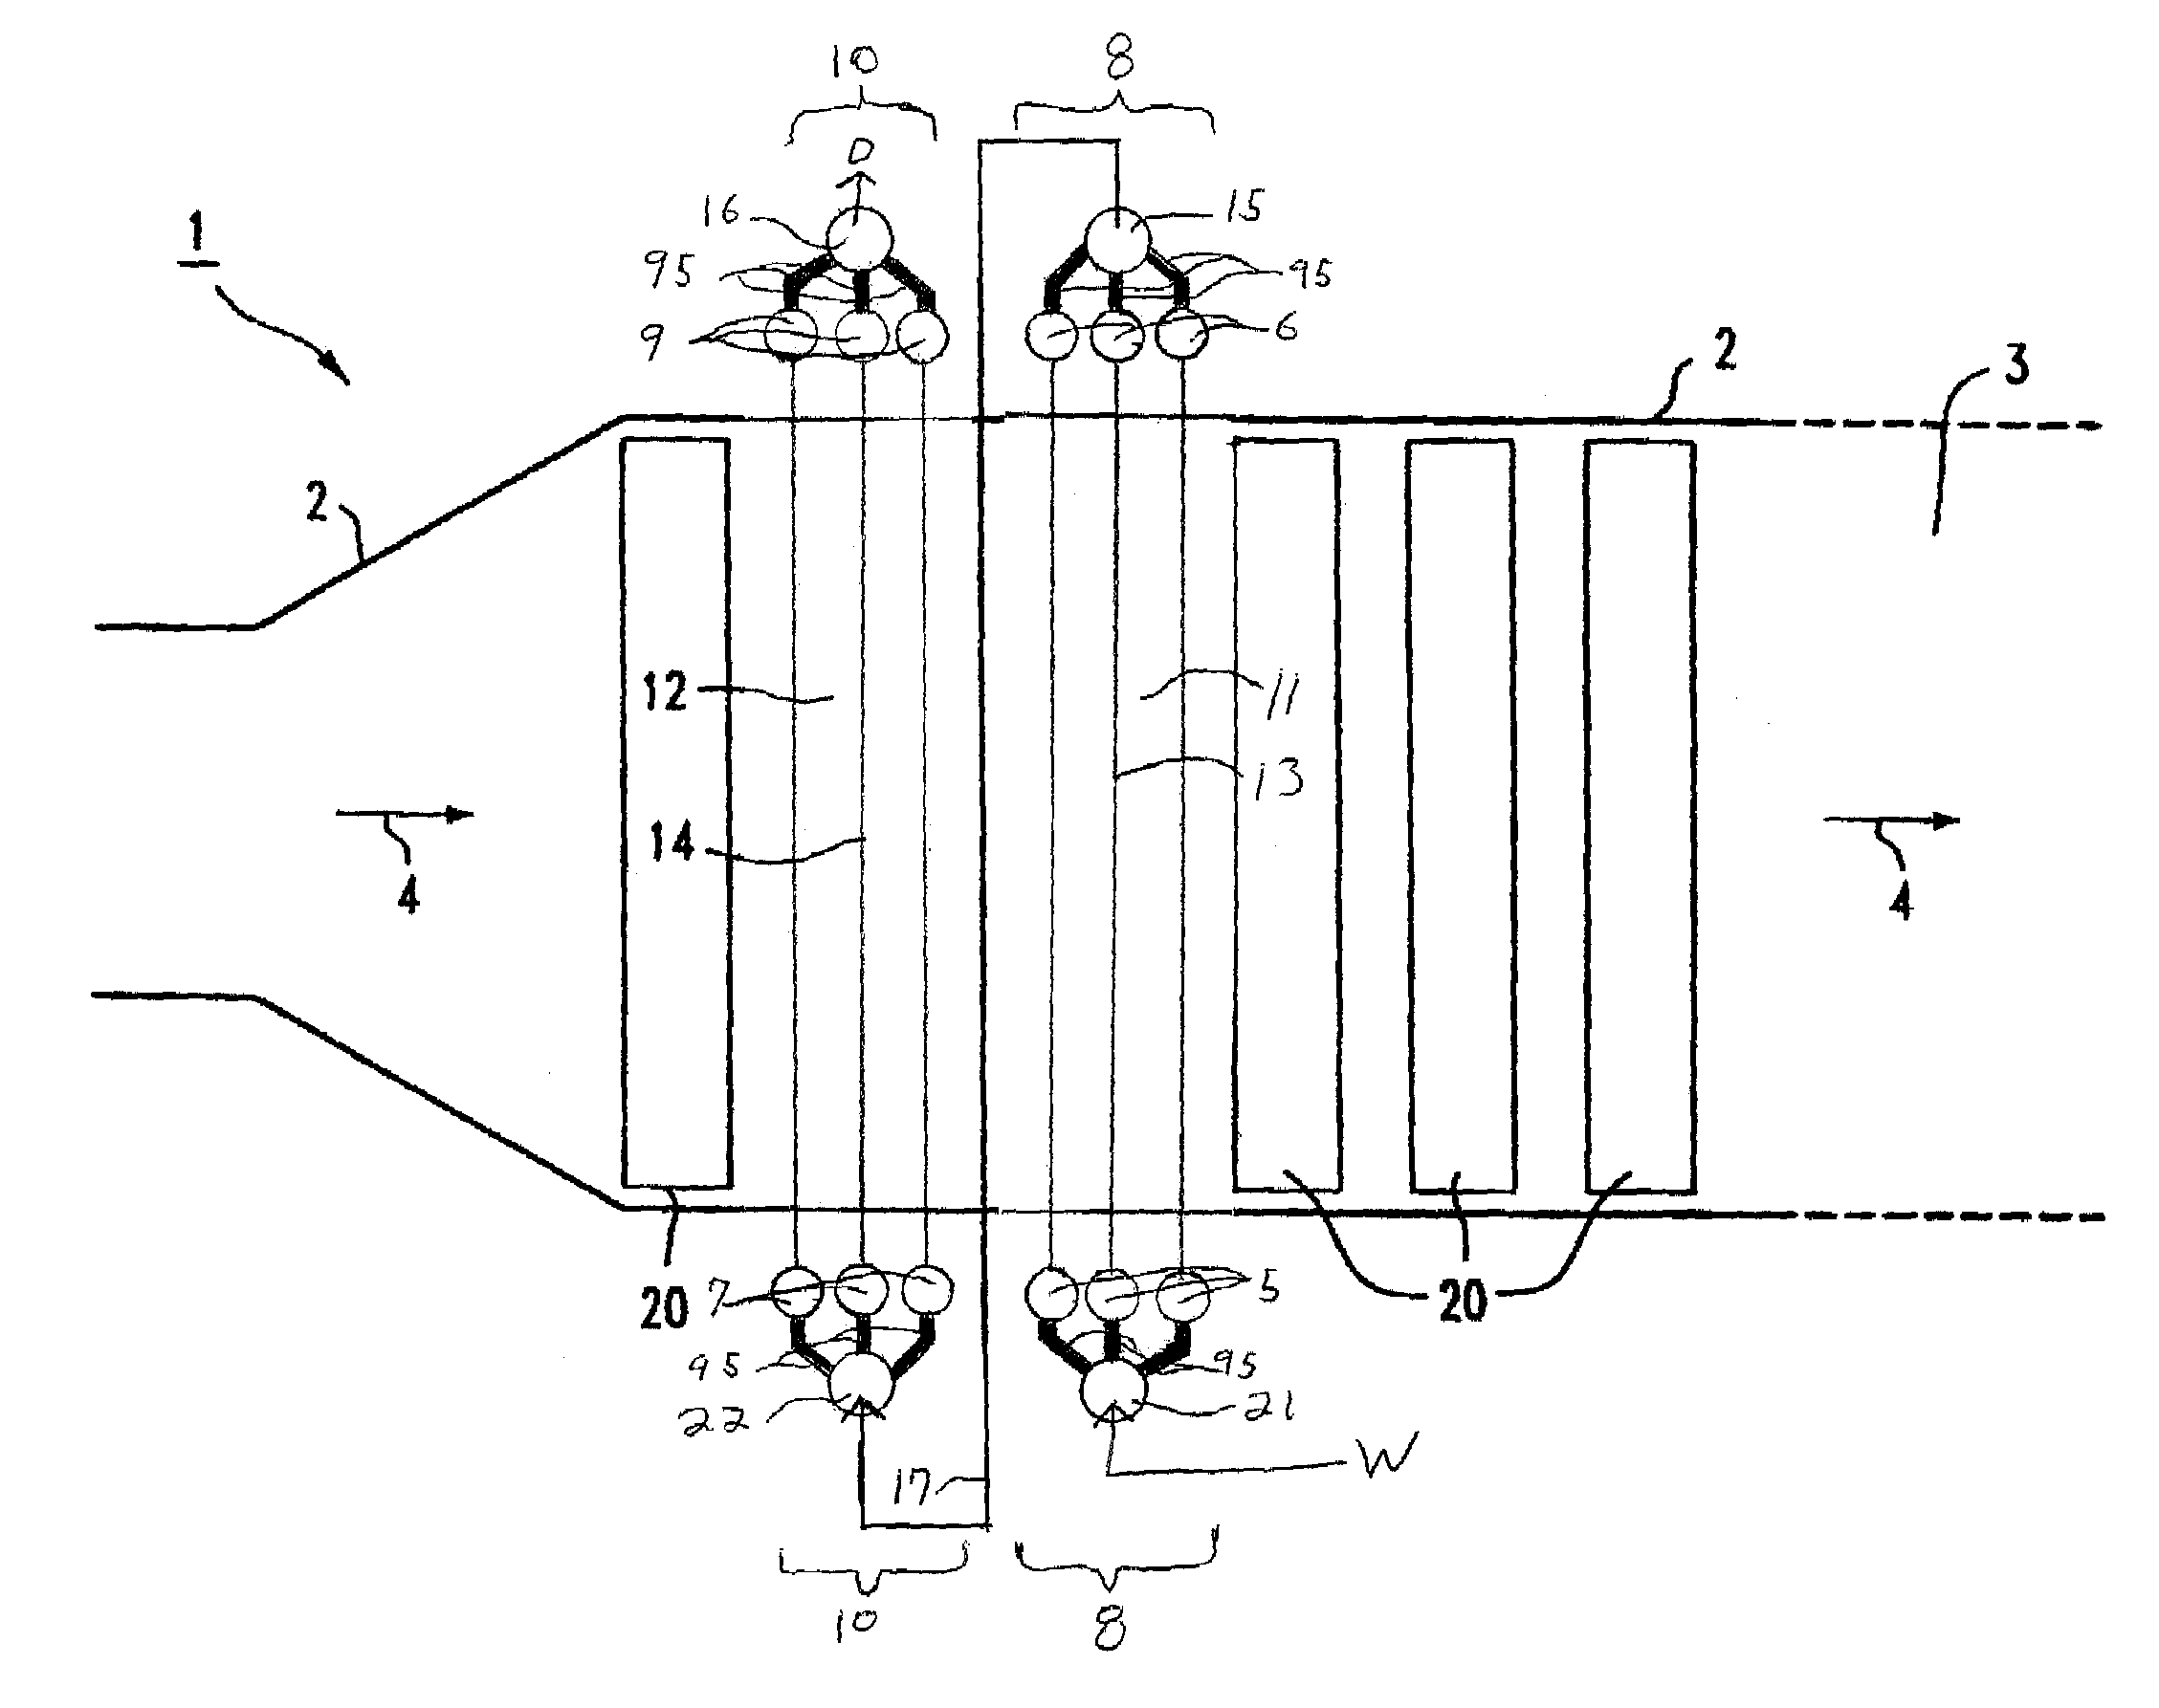 Flexible assembly of once-through evaporation for horizontal heat recovery steam generator